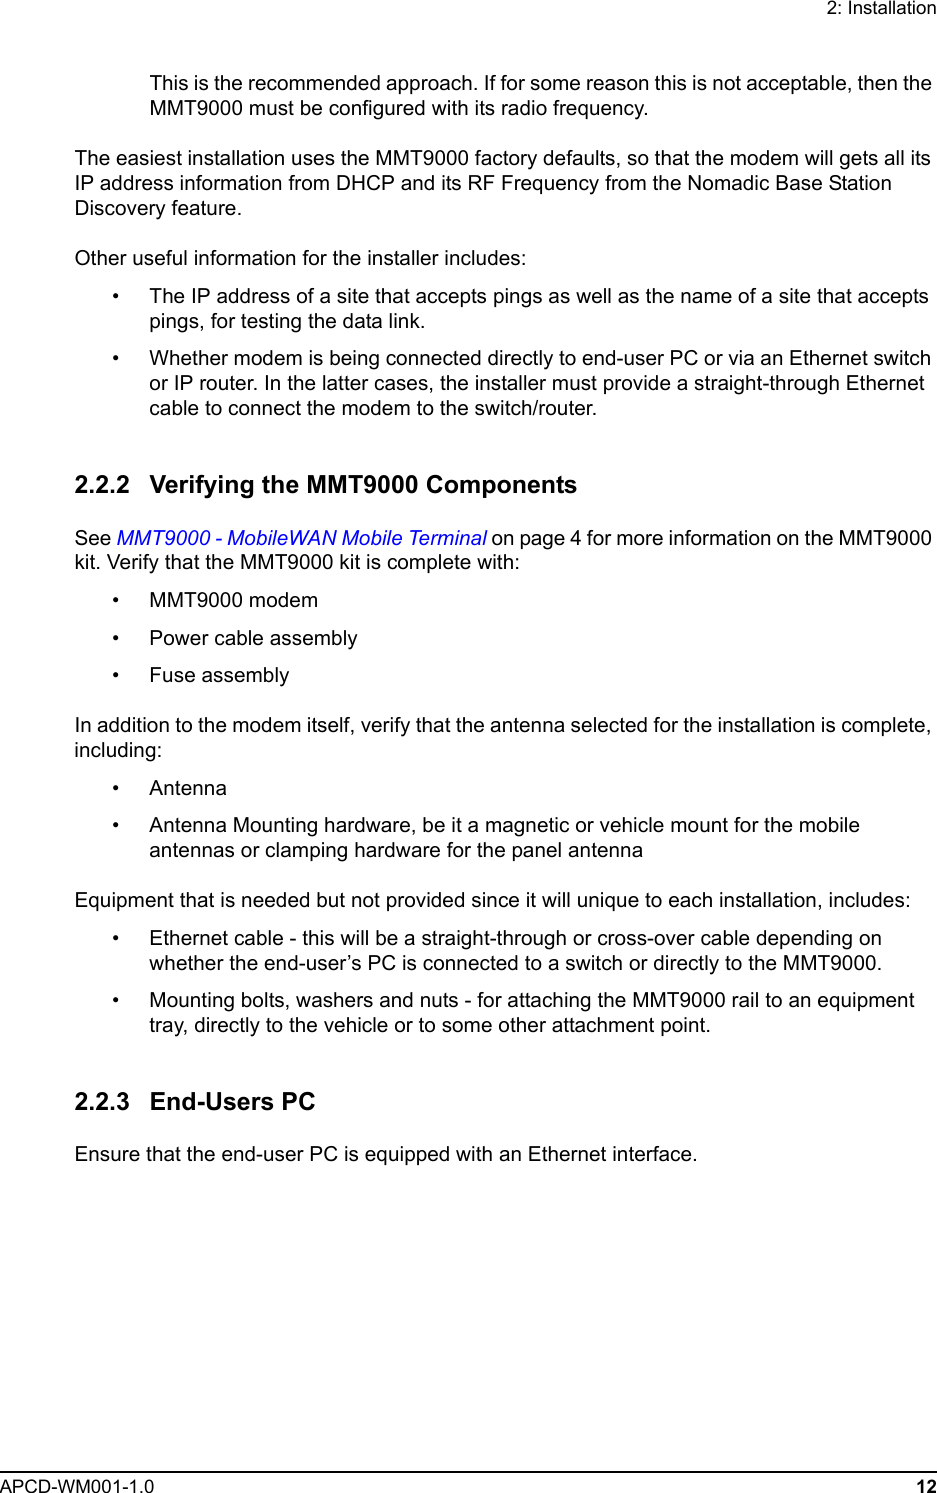 2: InstallationAPCD-WM001-1.0 12This is the recommended approach. If for some reason this is not acceptable, then the MMT9000 must be configured with its radio frequency.The easiest installation uses the MMT9000 factory defaults, so that the modem will gets all its IP address information from DHCP and its RF Frequency from the Nomadic Base Station Discovery feature. Other useful information for the installer includes:• The IP address of a site that accepts pings as well as the name of a site that accepts pings, for testing the data link.• Whether modem is being connected directly to end-user PC or via an Ethernet switch or IP router. In the latter cases, the installer must provide a straight-through Ethernet cable to connect the modem to the switch/router.2.2.2 Verifying the MMT9000 ComponentsSee MMT9000 - MobileWAN Mobile Terminal on page 4 for more information on the MMT9000 kit. Verify that the MMT9000 kit is complete with:• MMT9000 modem• Power cable assembly• Fuse assemblyIn addition to the modem itself, verify that the antenna selected for the installation is complete, including:• Antenna• Antenna Mounting hardware, be it a magnetic or vehicle mount for the mobile antennas or clamping hardware for the panel antennaEquipment that is needed but not provided since it will unique to each installation, includes:• Ethernet cable - this will be a straight-through or cross-over cable depending on whether the end-user’s PC is connected to a switch or directly to the MMT9000.• Mounting bolts, washers and nuts - for attaching the MMT9000 rail to an equipment tray, directly to the vehicle or to some other attachment point.2.2.3 End-Users PCEnsure that the end-user PC is equipped with an Ethernet interface. 